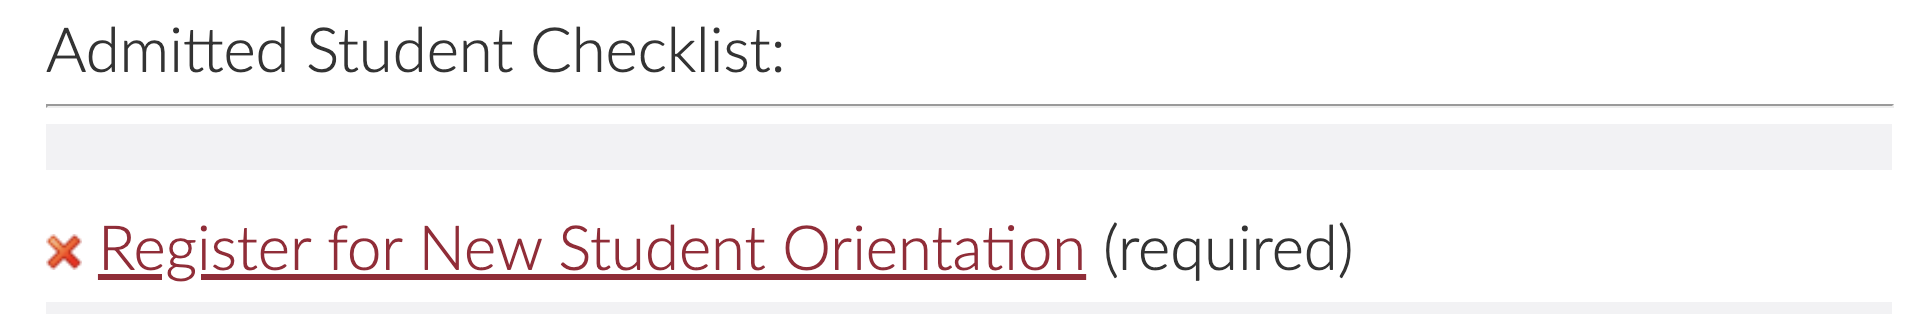 The Admitted Student Checklist now shows a link to Register for New Student Orientation.